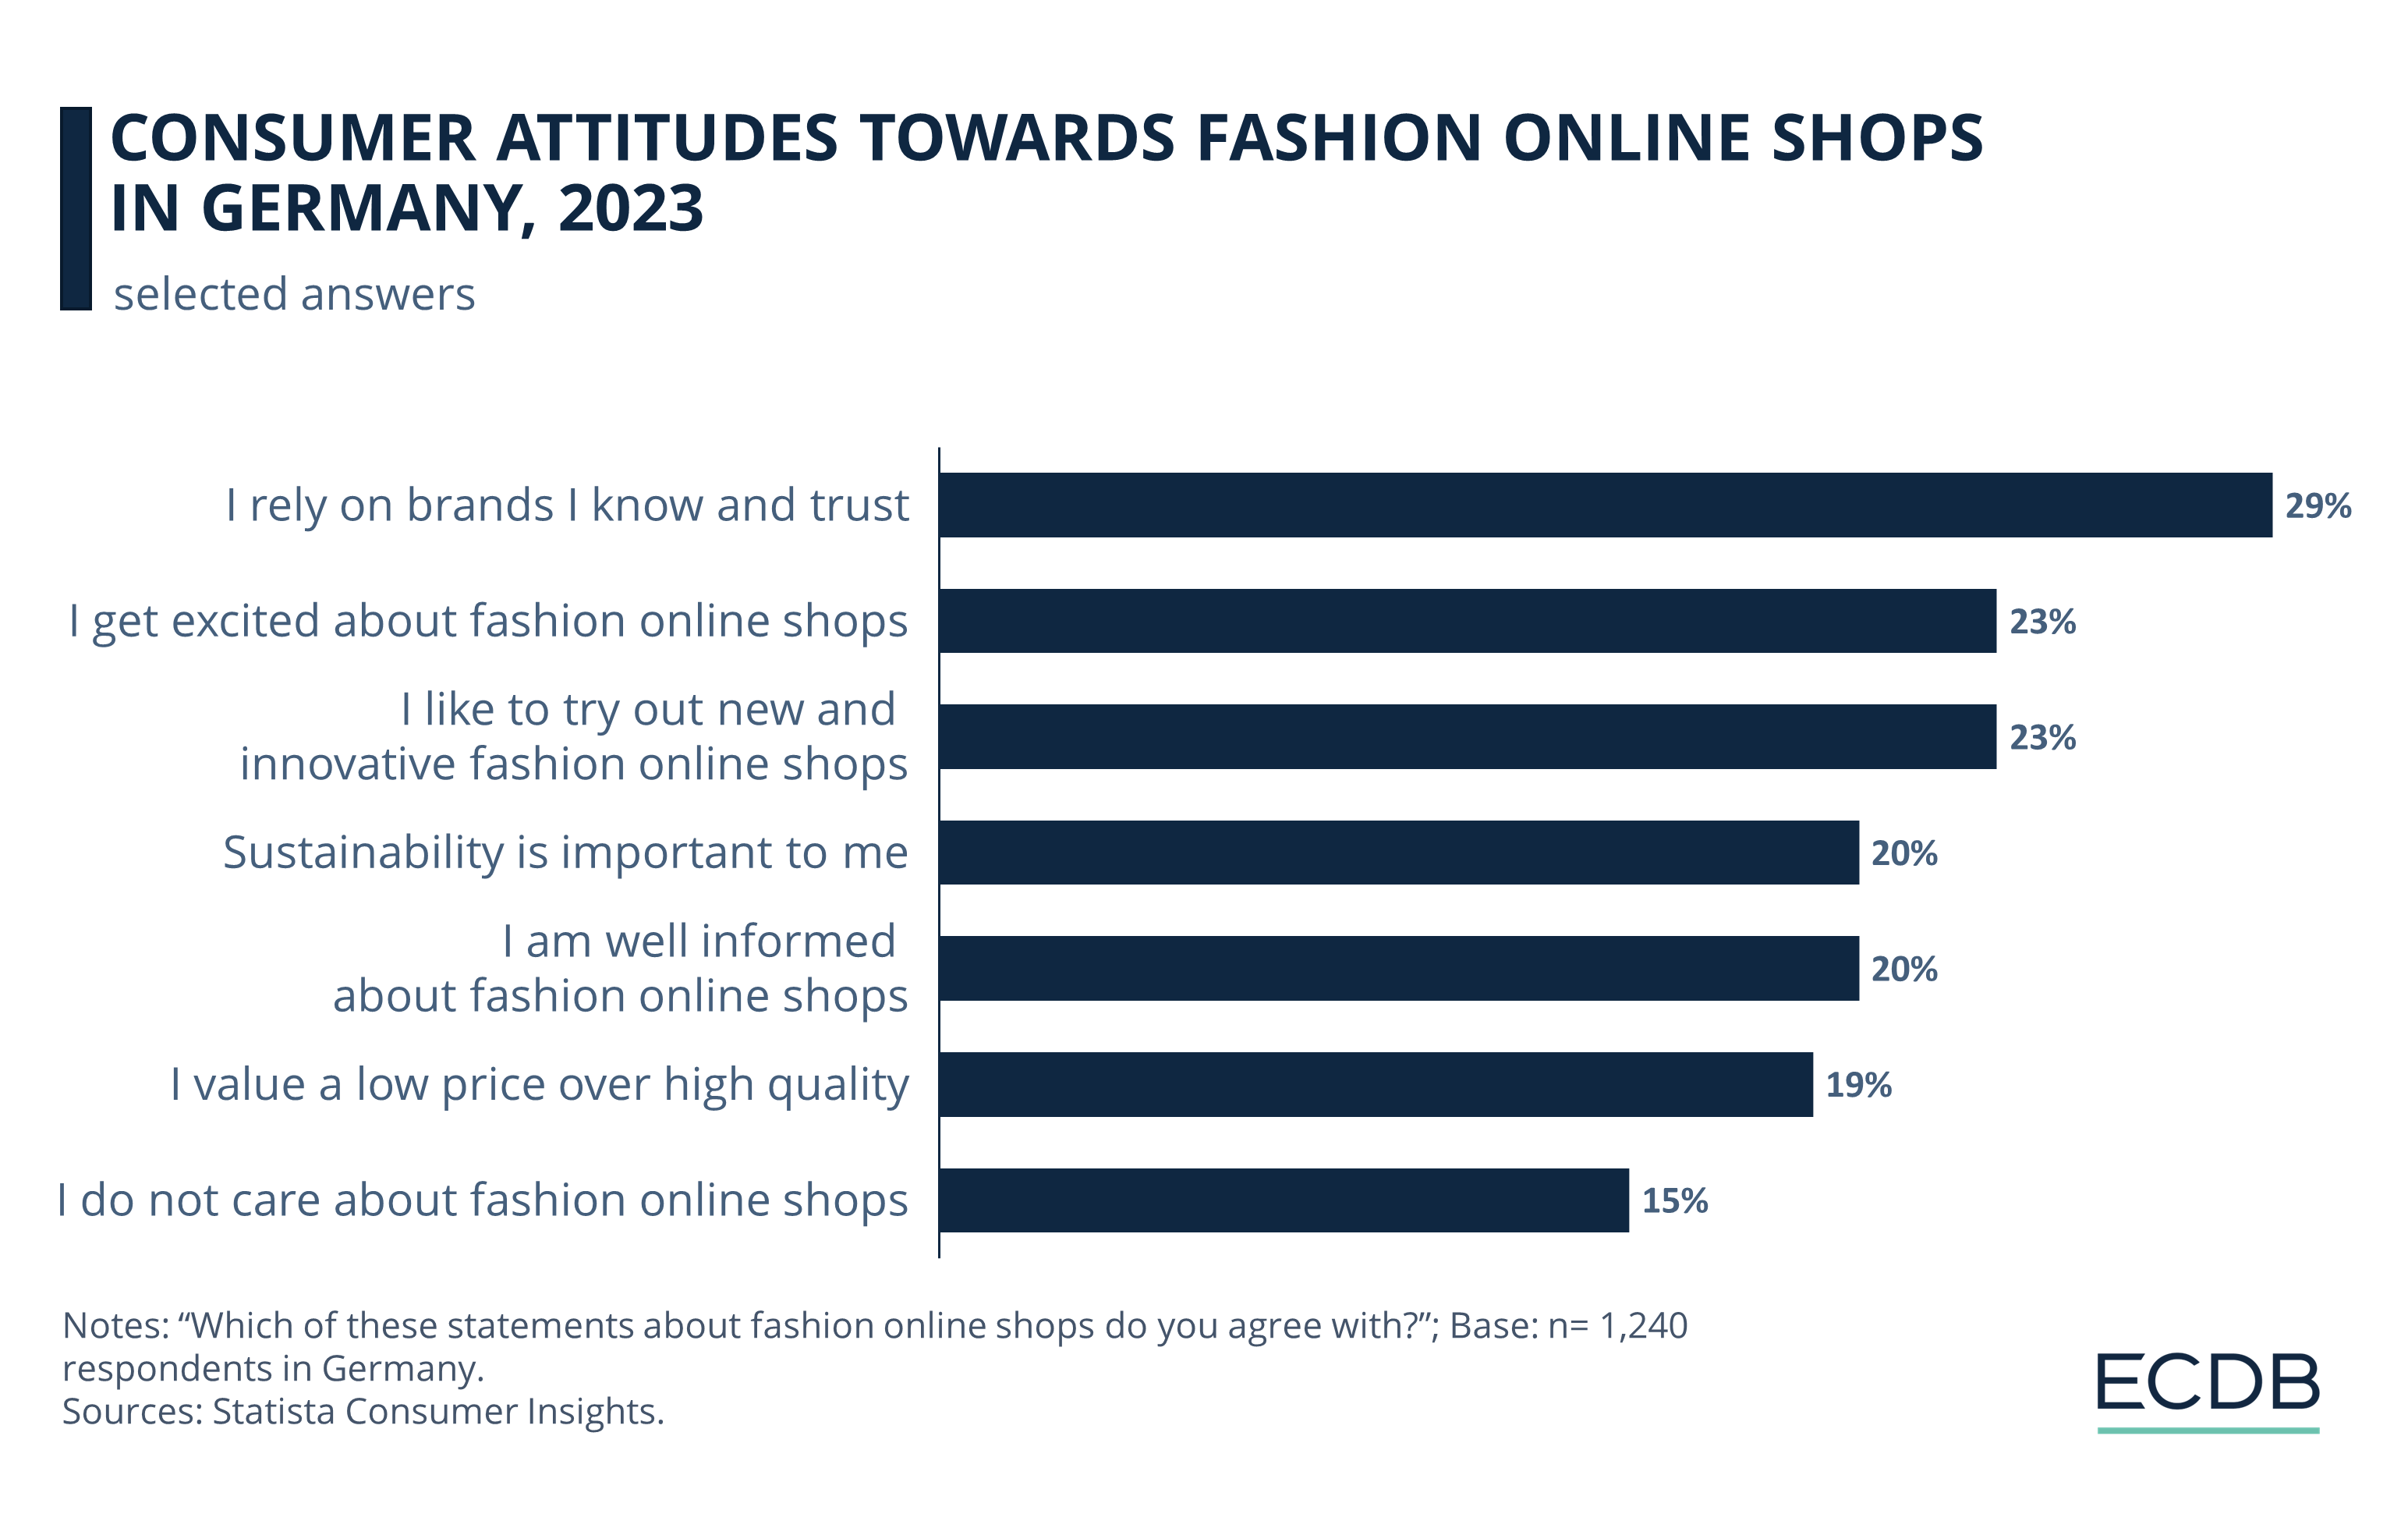 Consumer Attitudes Towards Fashion Online Shops in Germany, 2023